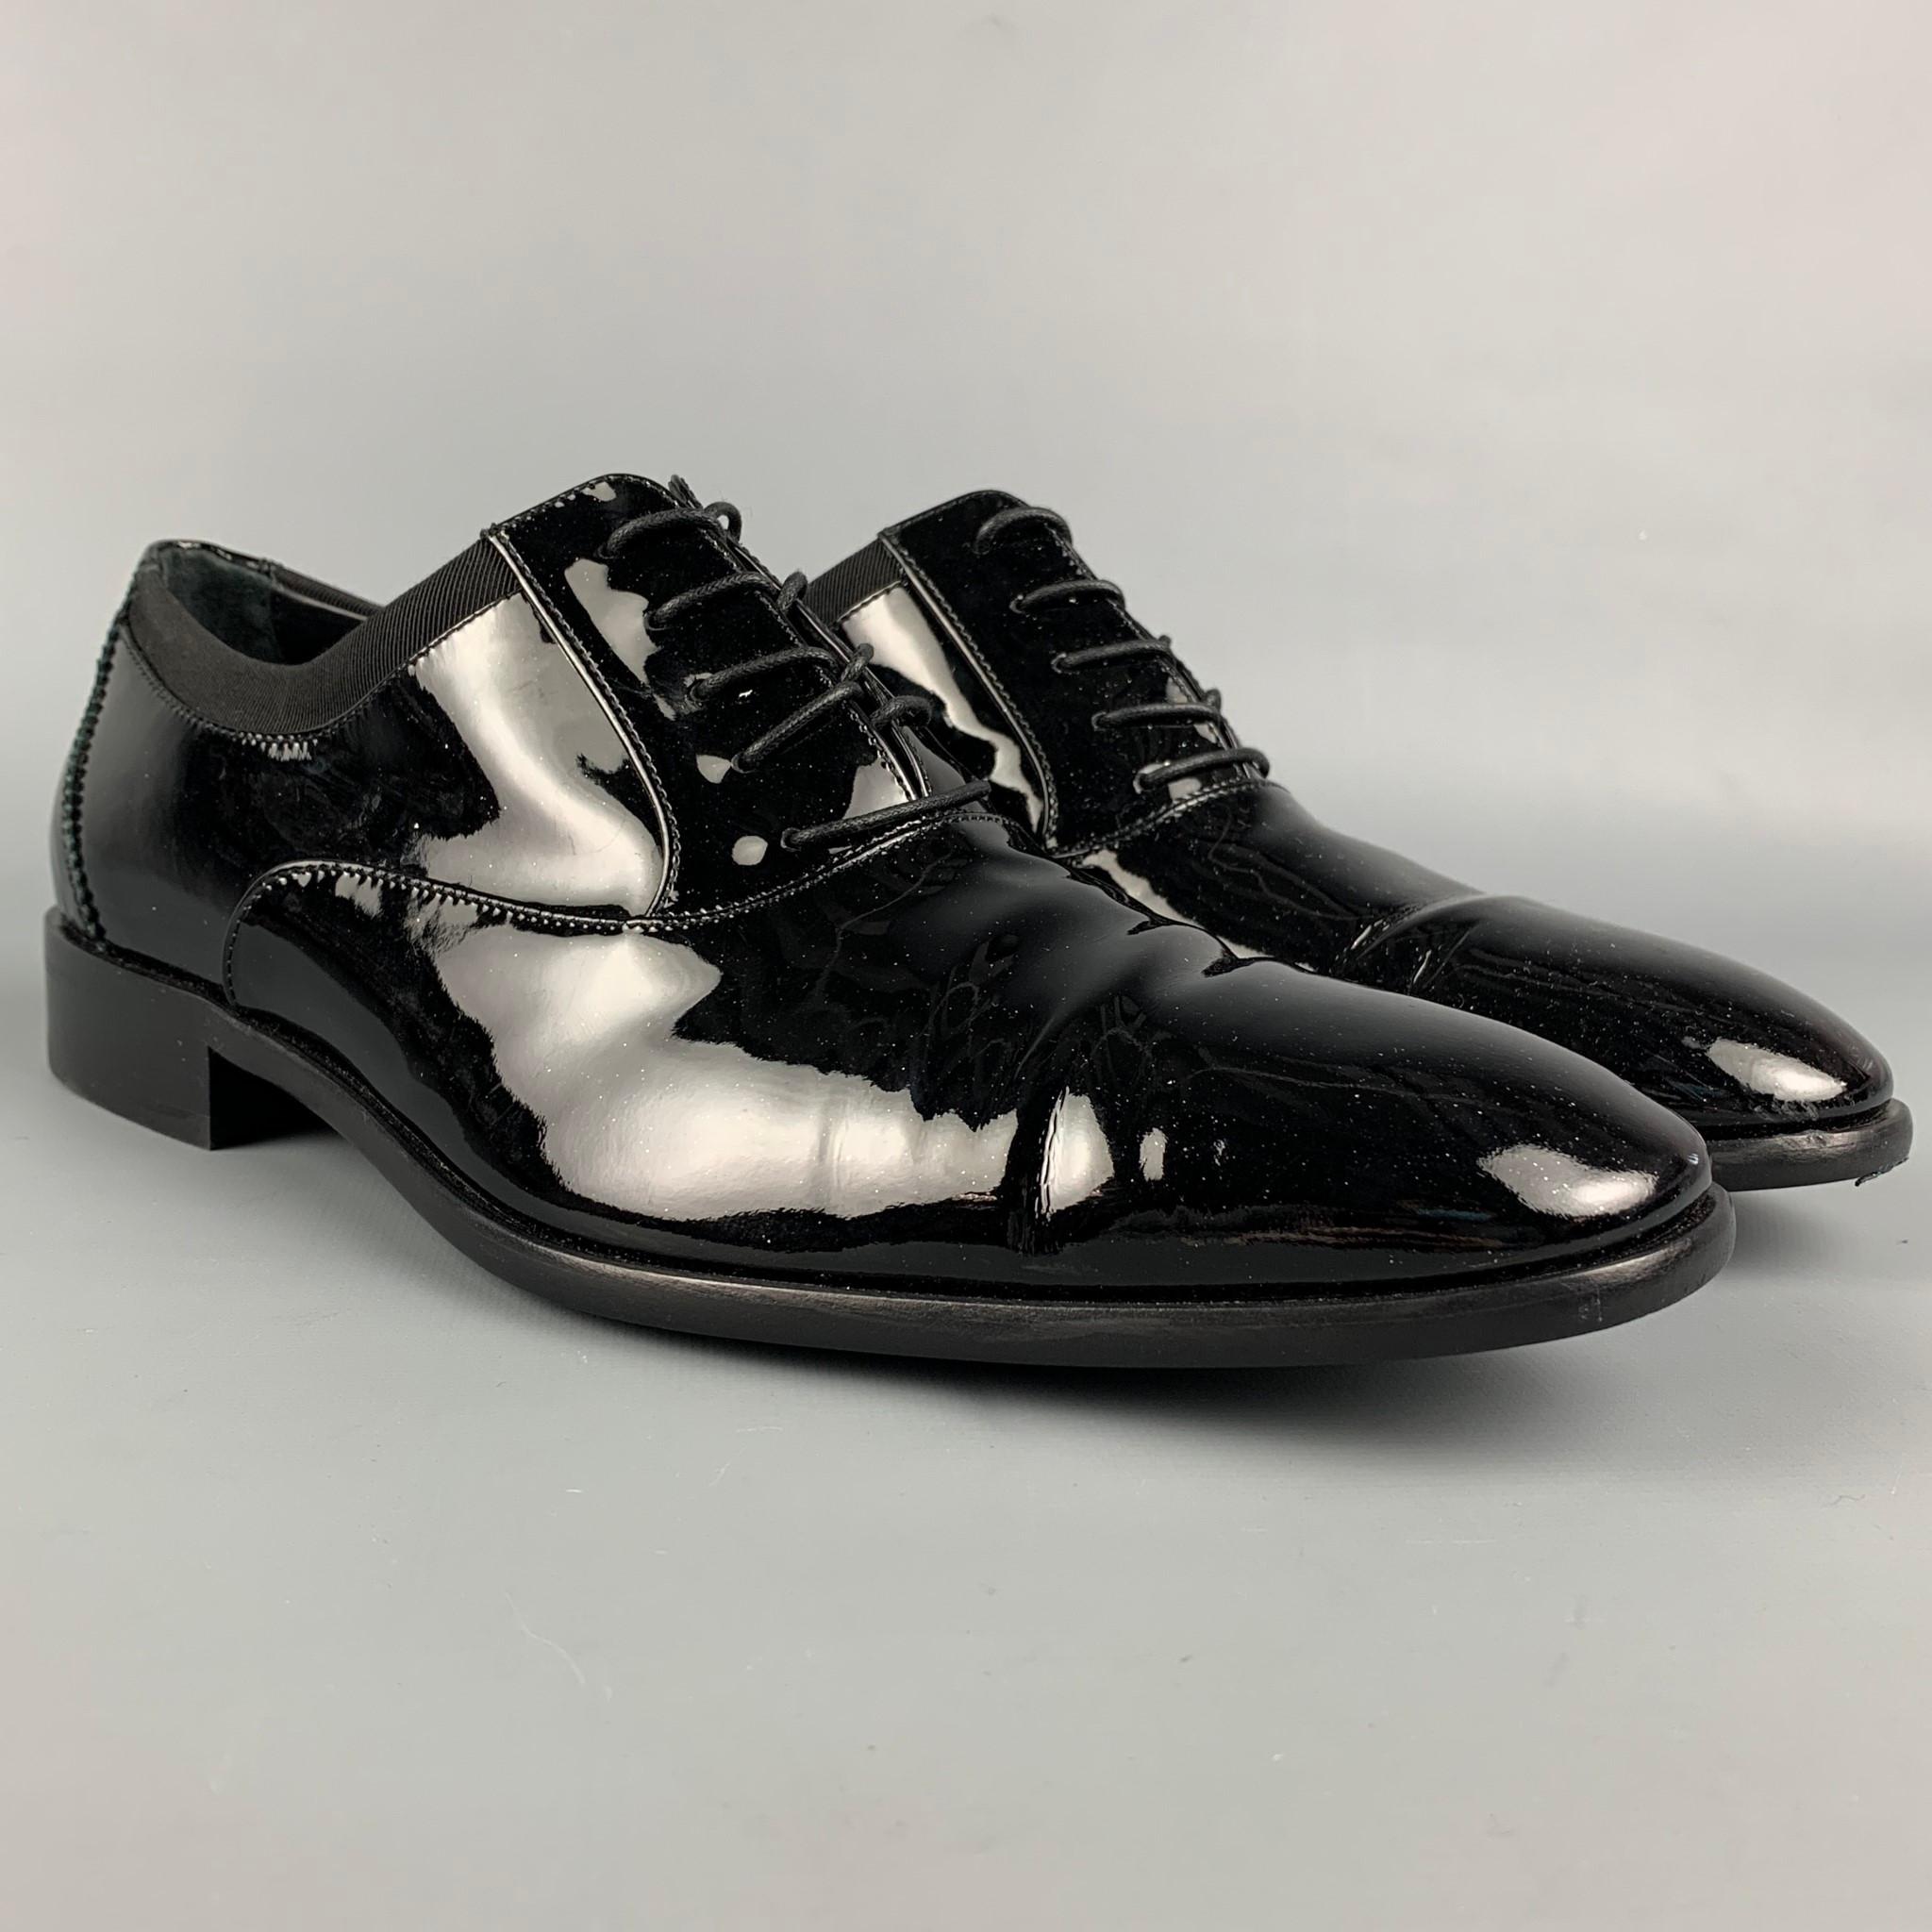 SALVATORE FERRAGAMO shoes comes in a black patent leather featuring a square toe, ribbon trim, and a lace up closure. Made in Italy. 

Very Good Pre-Owned Condition.
Marked: VF 77977 8.5 2 E

Outsole: 12 in. x 4 in. 